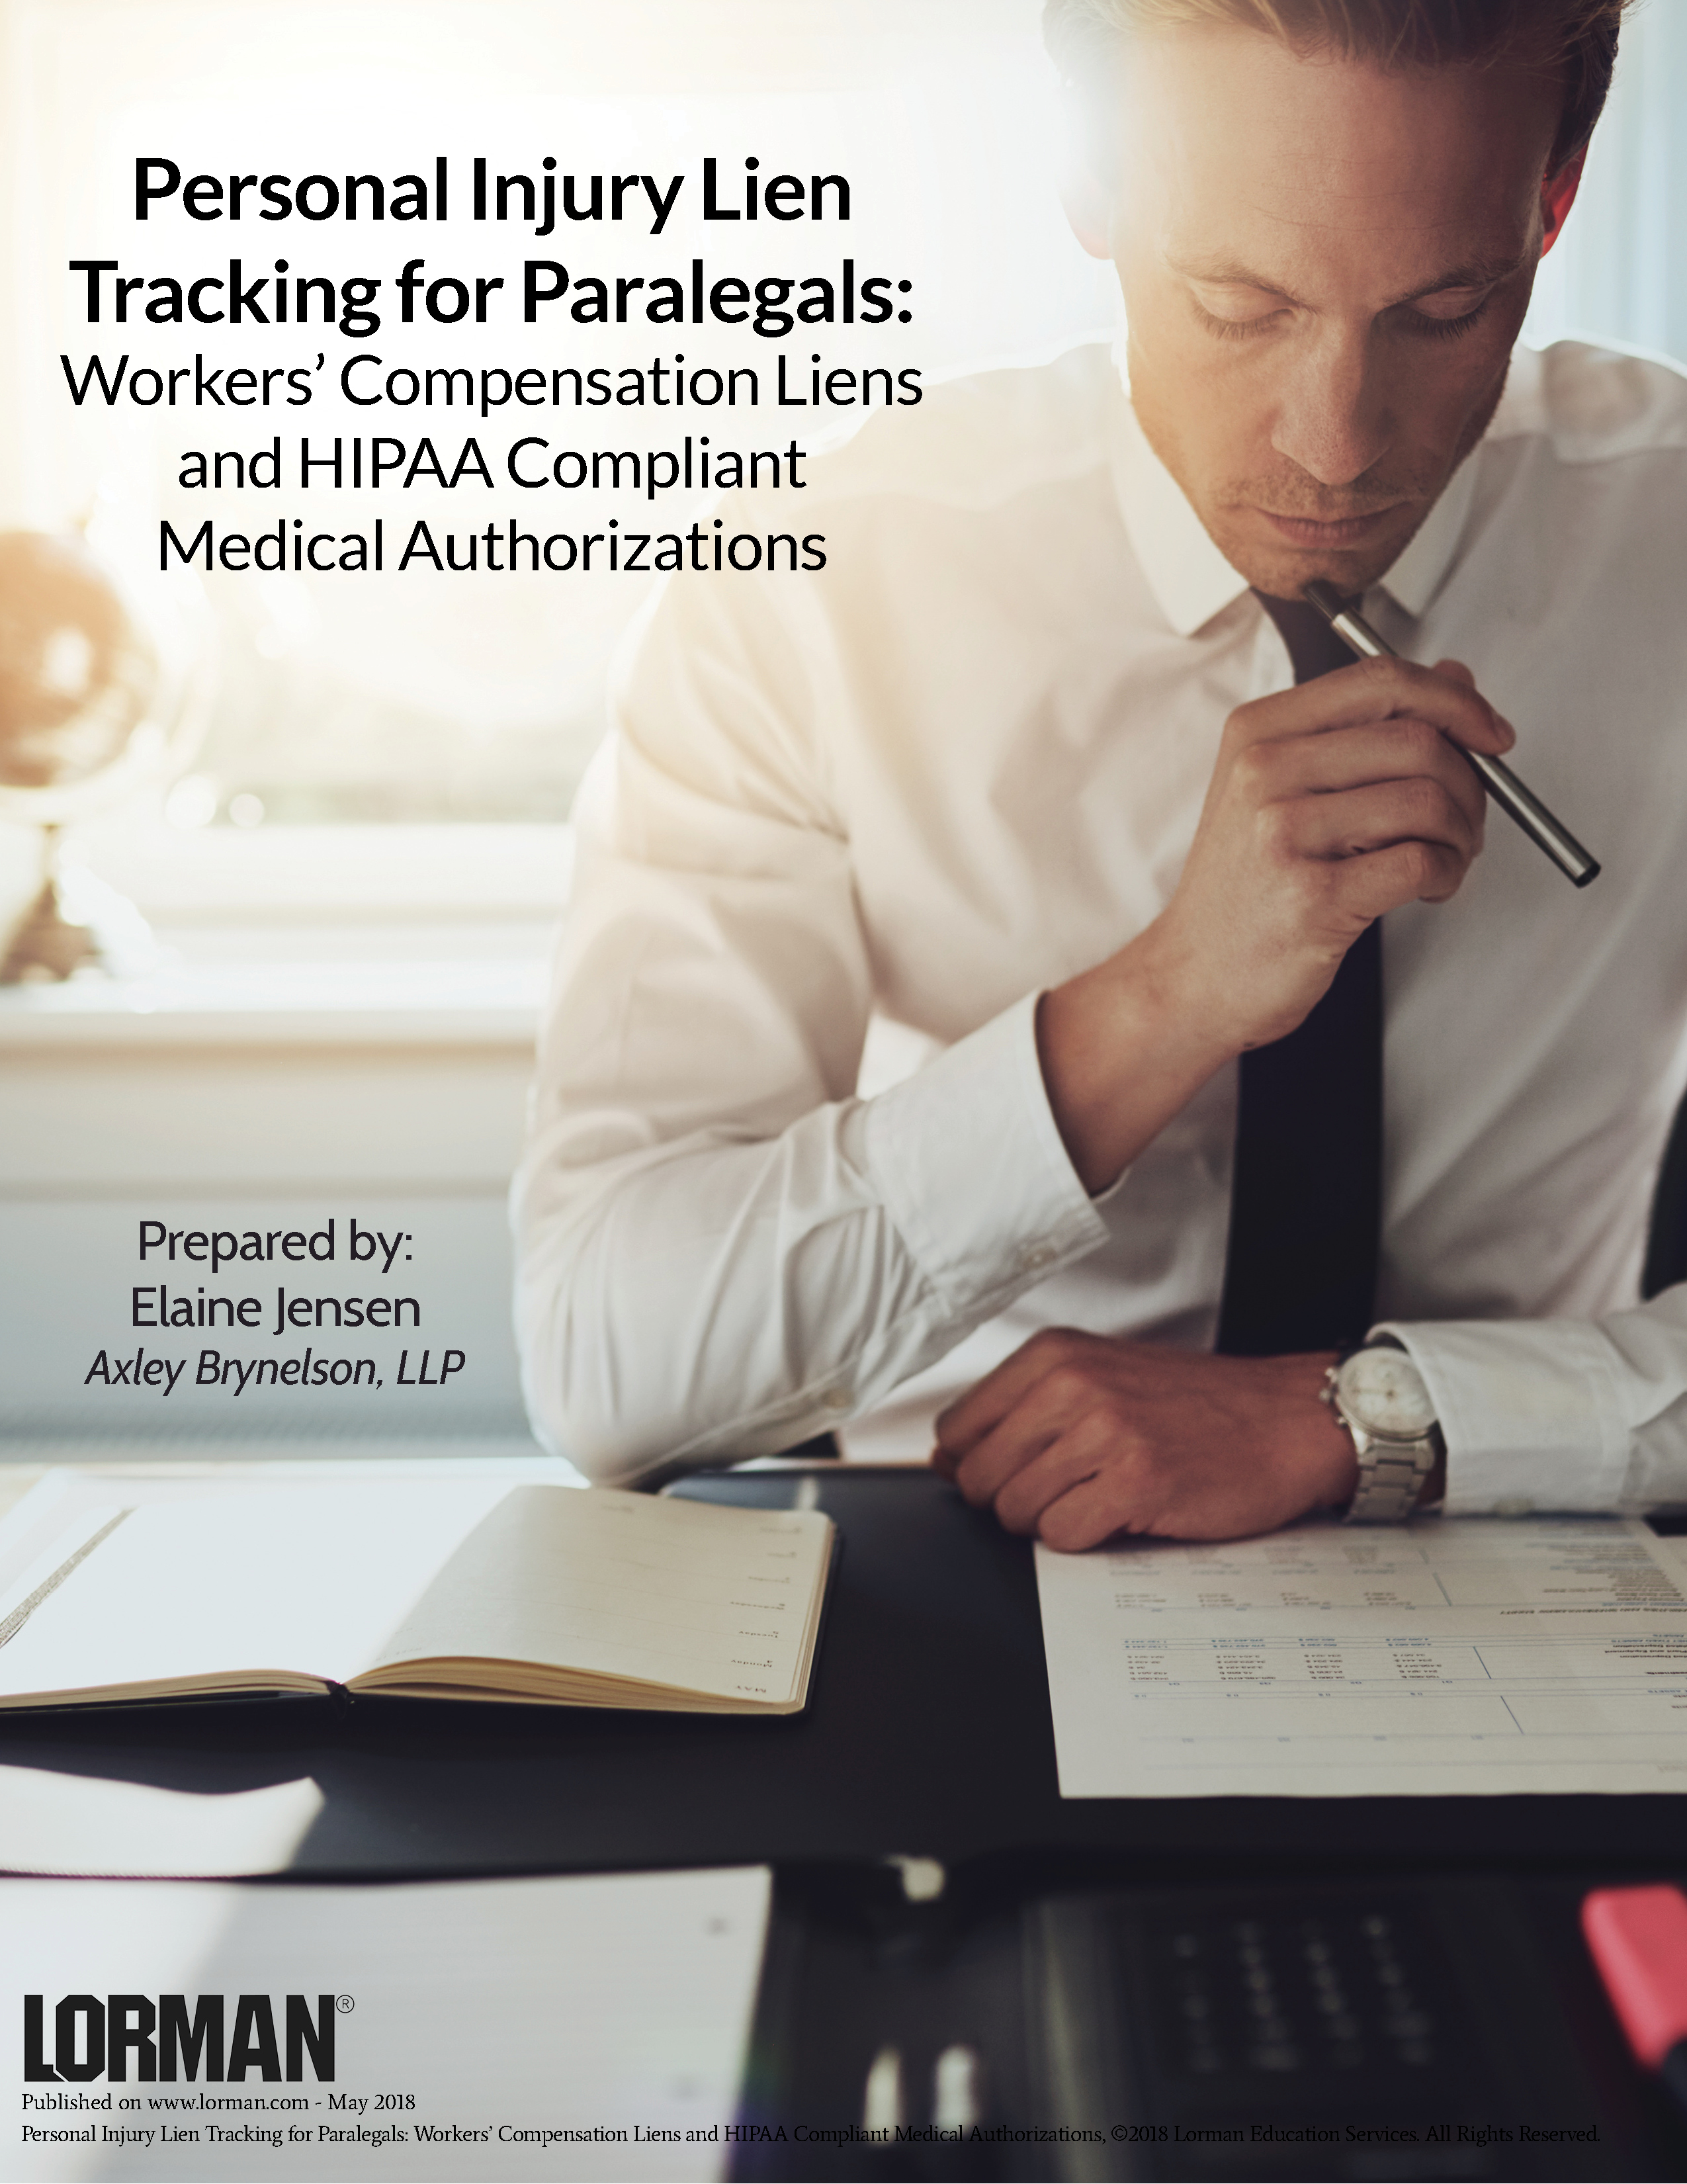 Personal Injury Lien Tracking for Paralegals